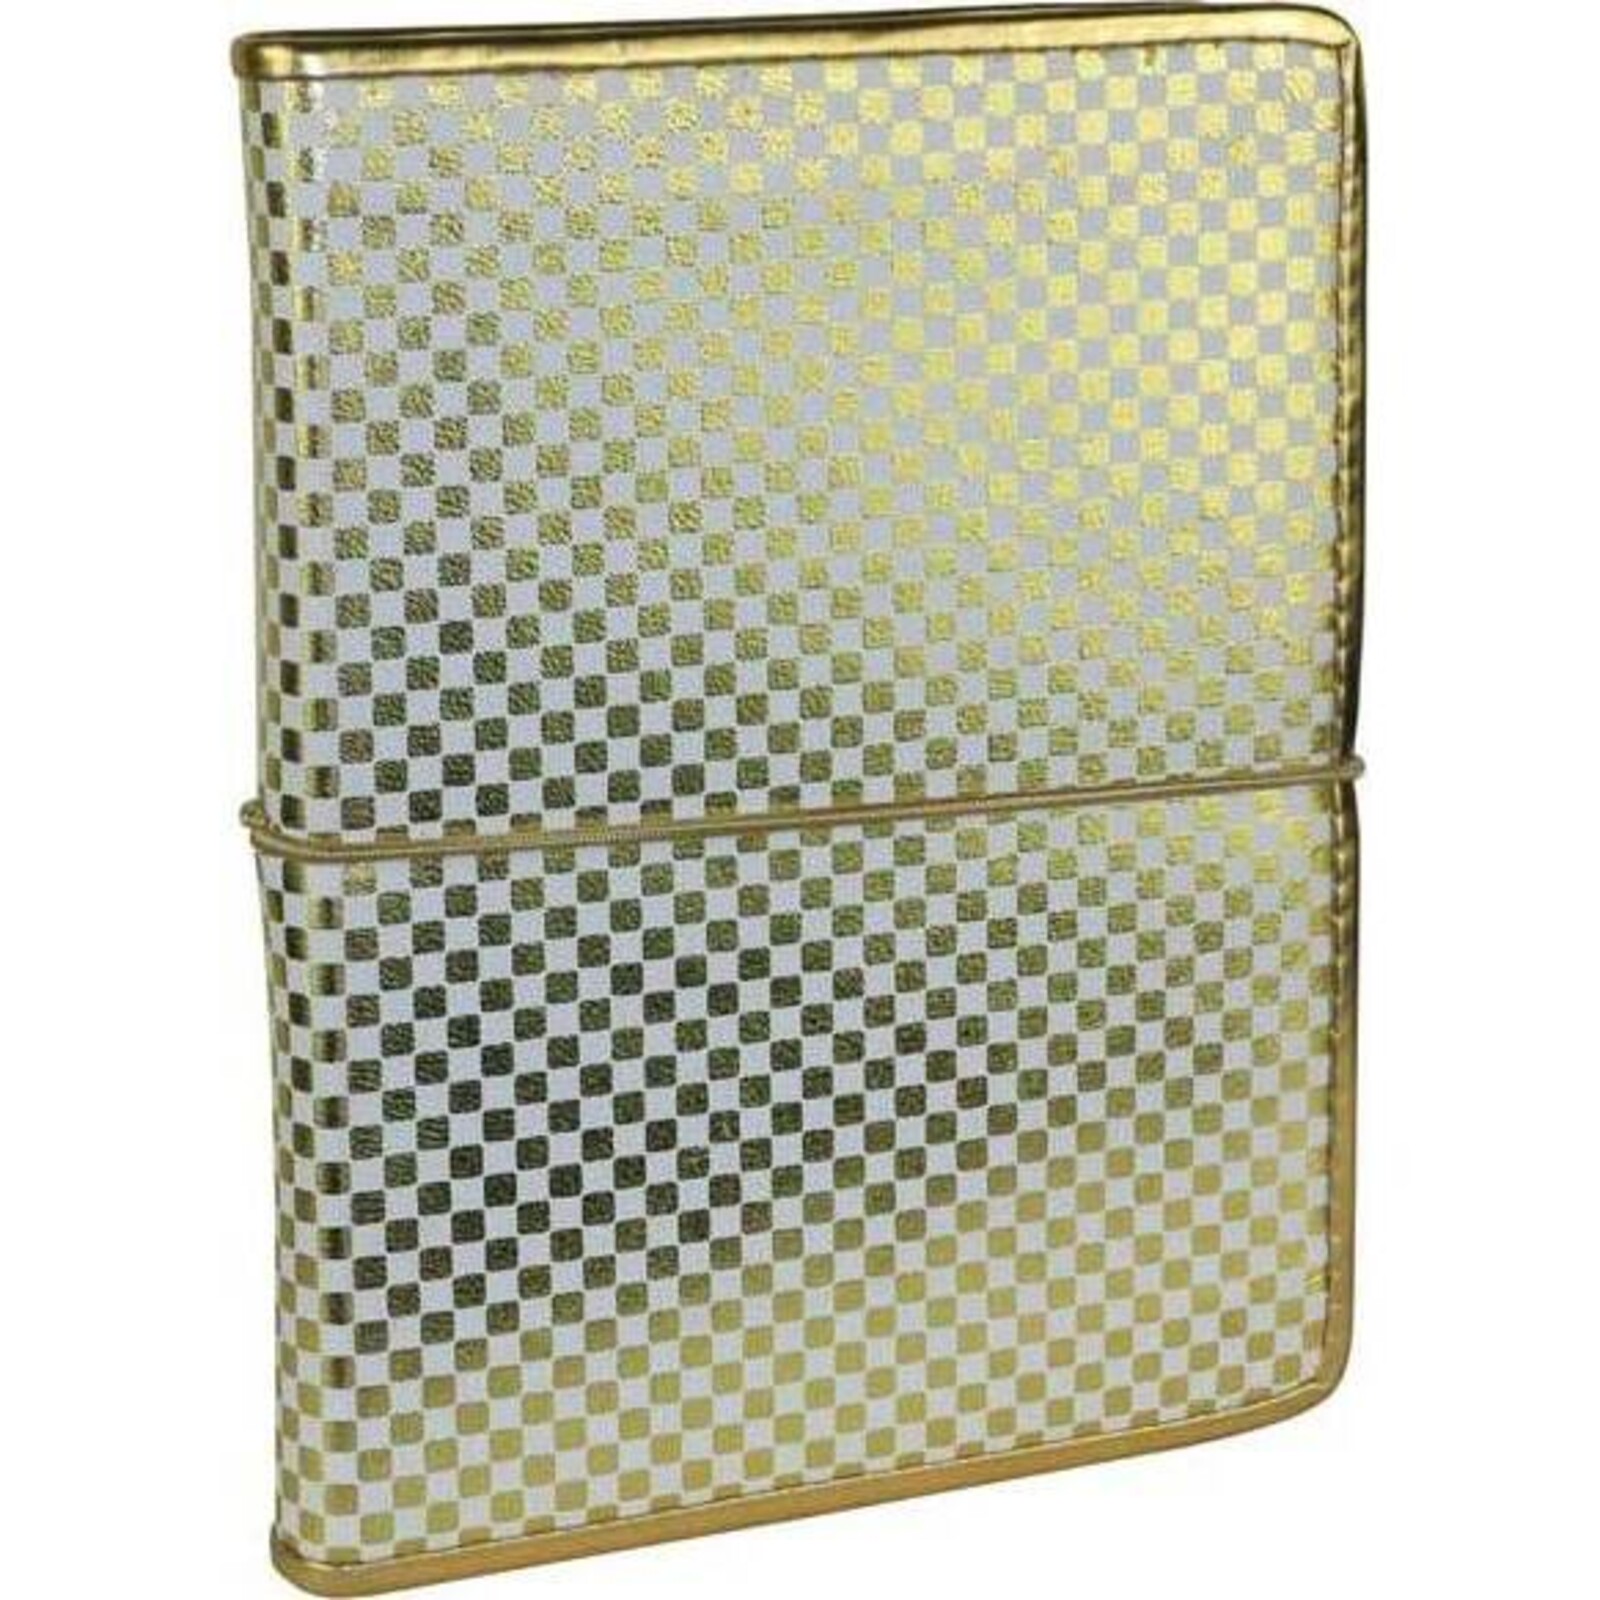  Leather Notebook Gold Check Large